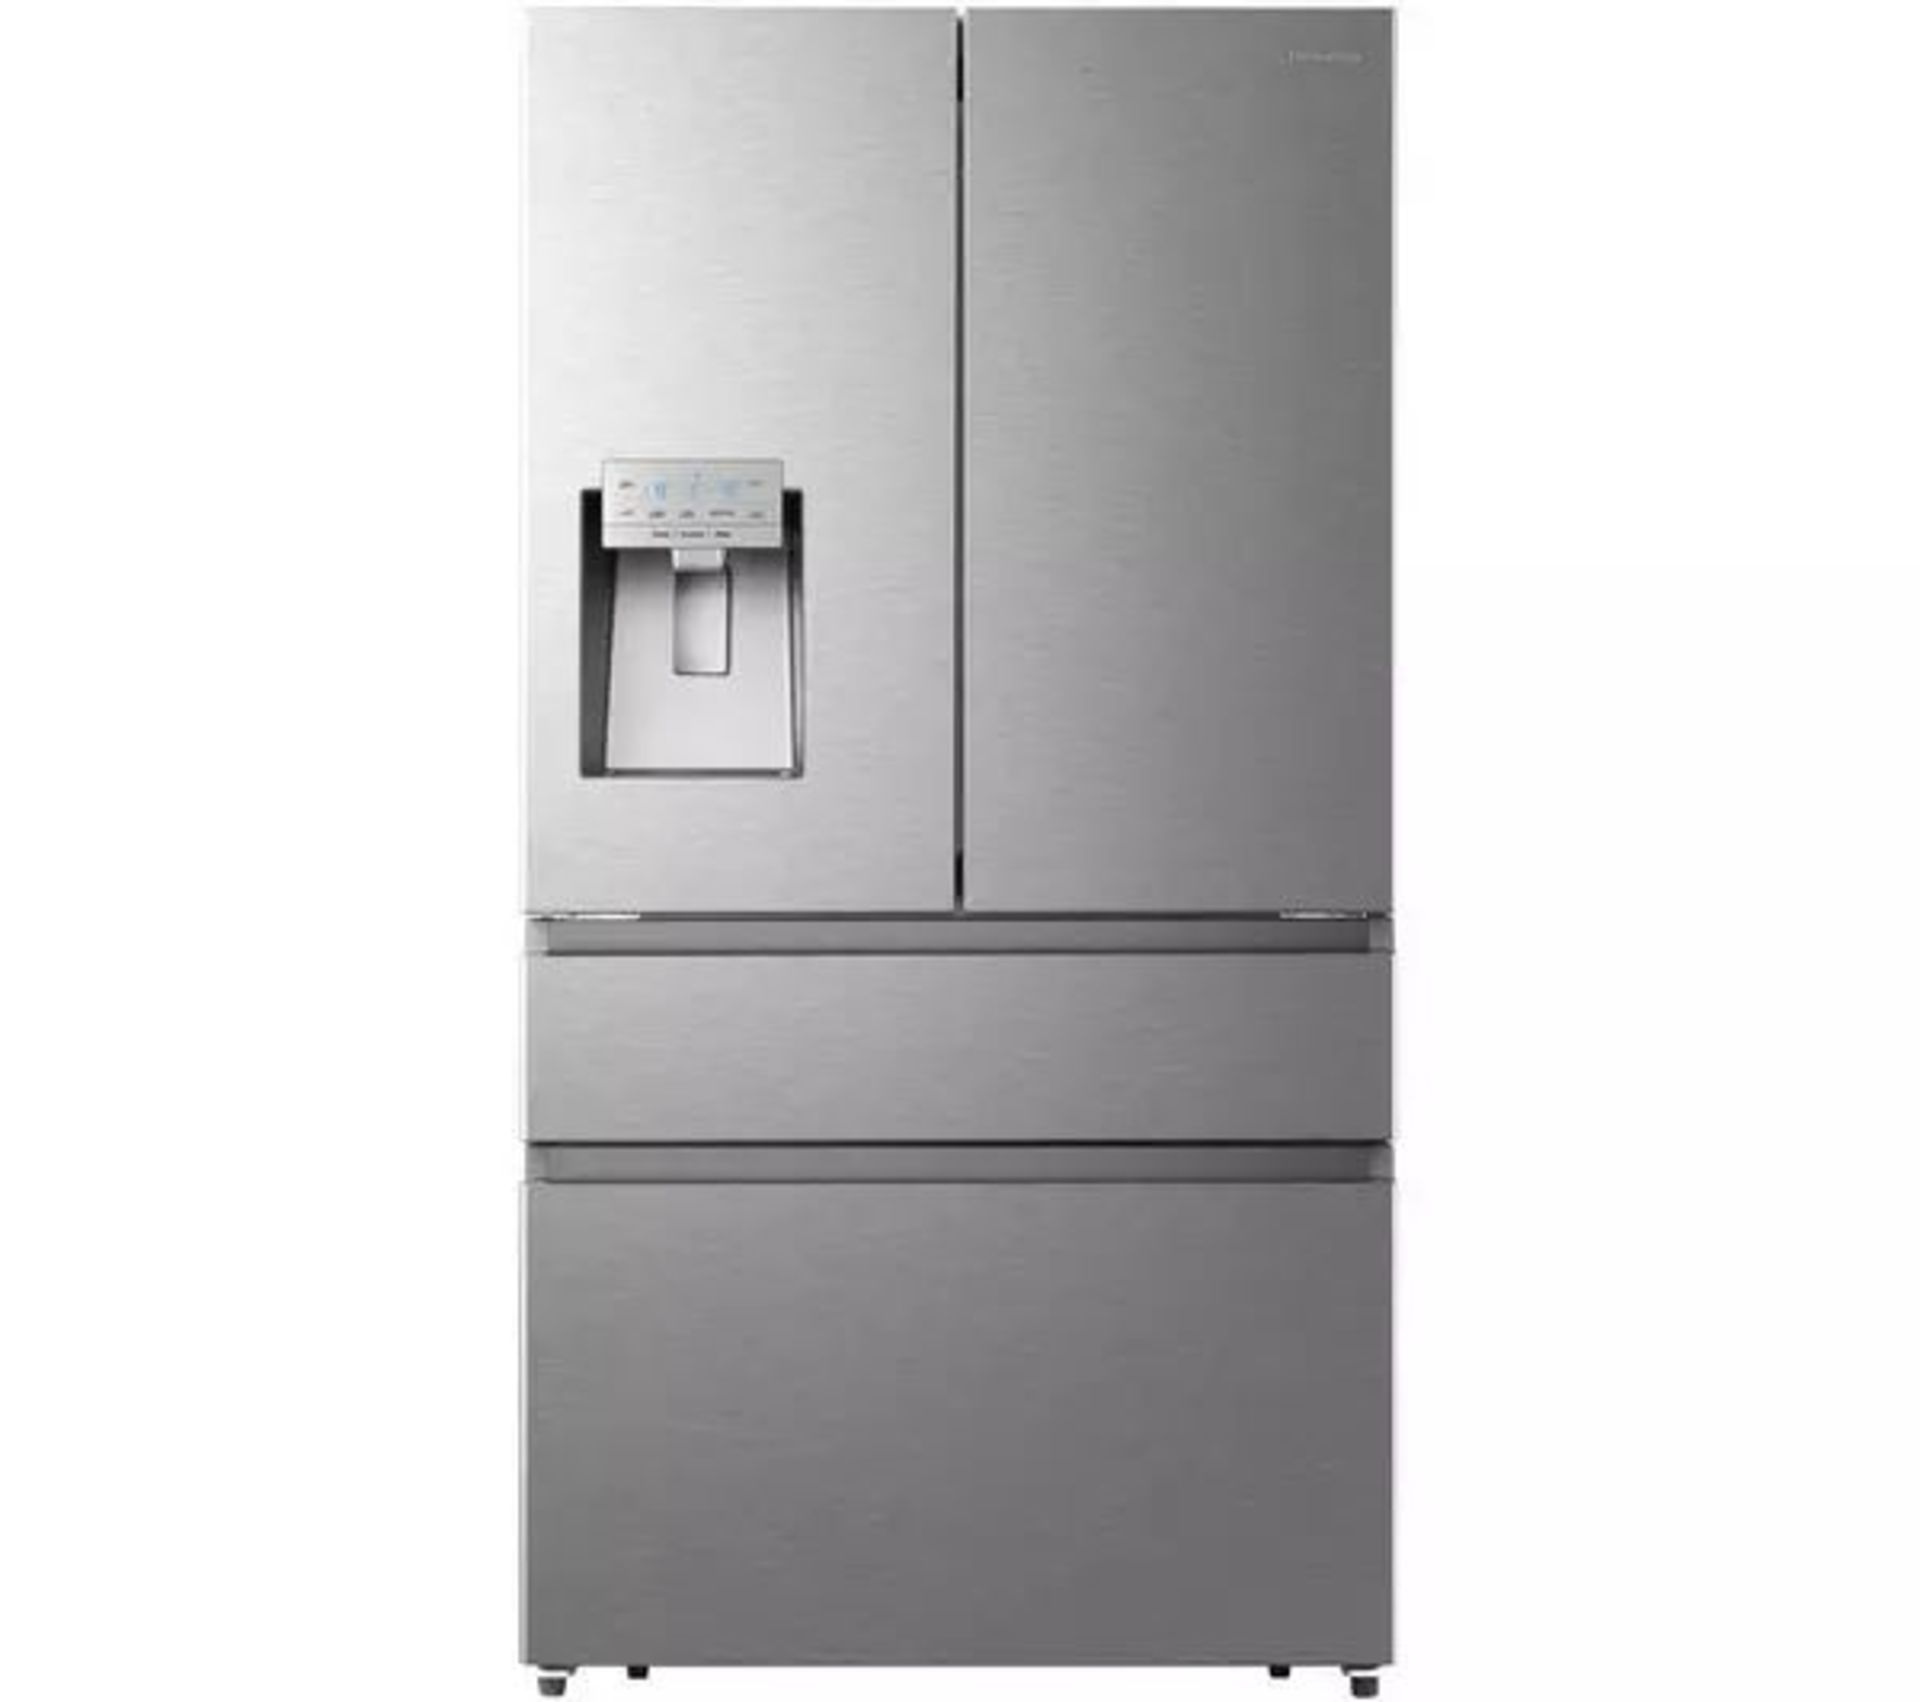 HISENSE RF728N4AIF Fridge Freezer - Stainless Steel. - RRP £1,619.00. There's a section that you can